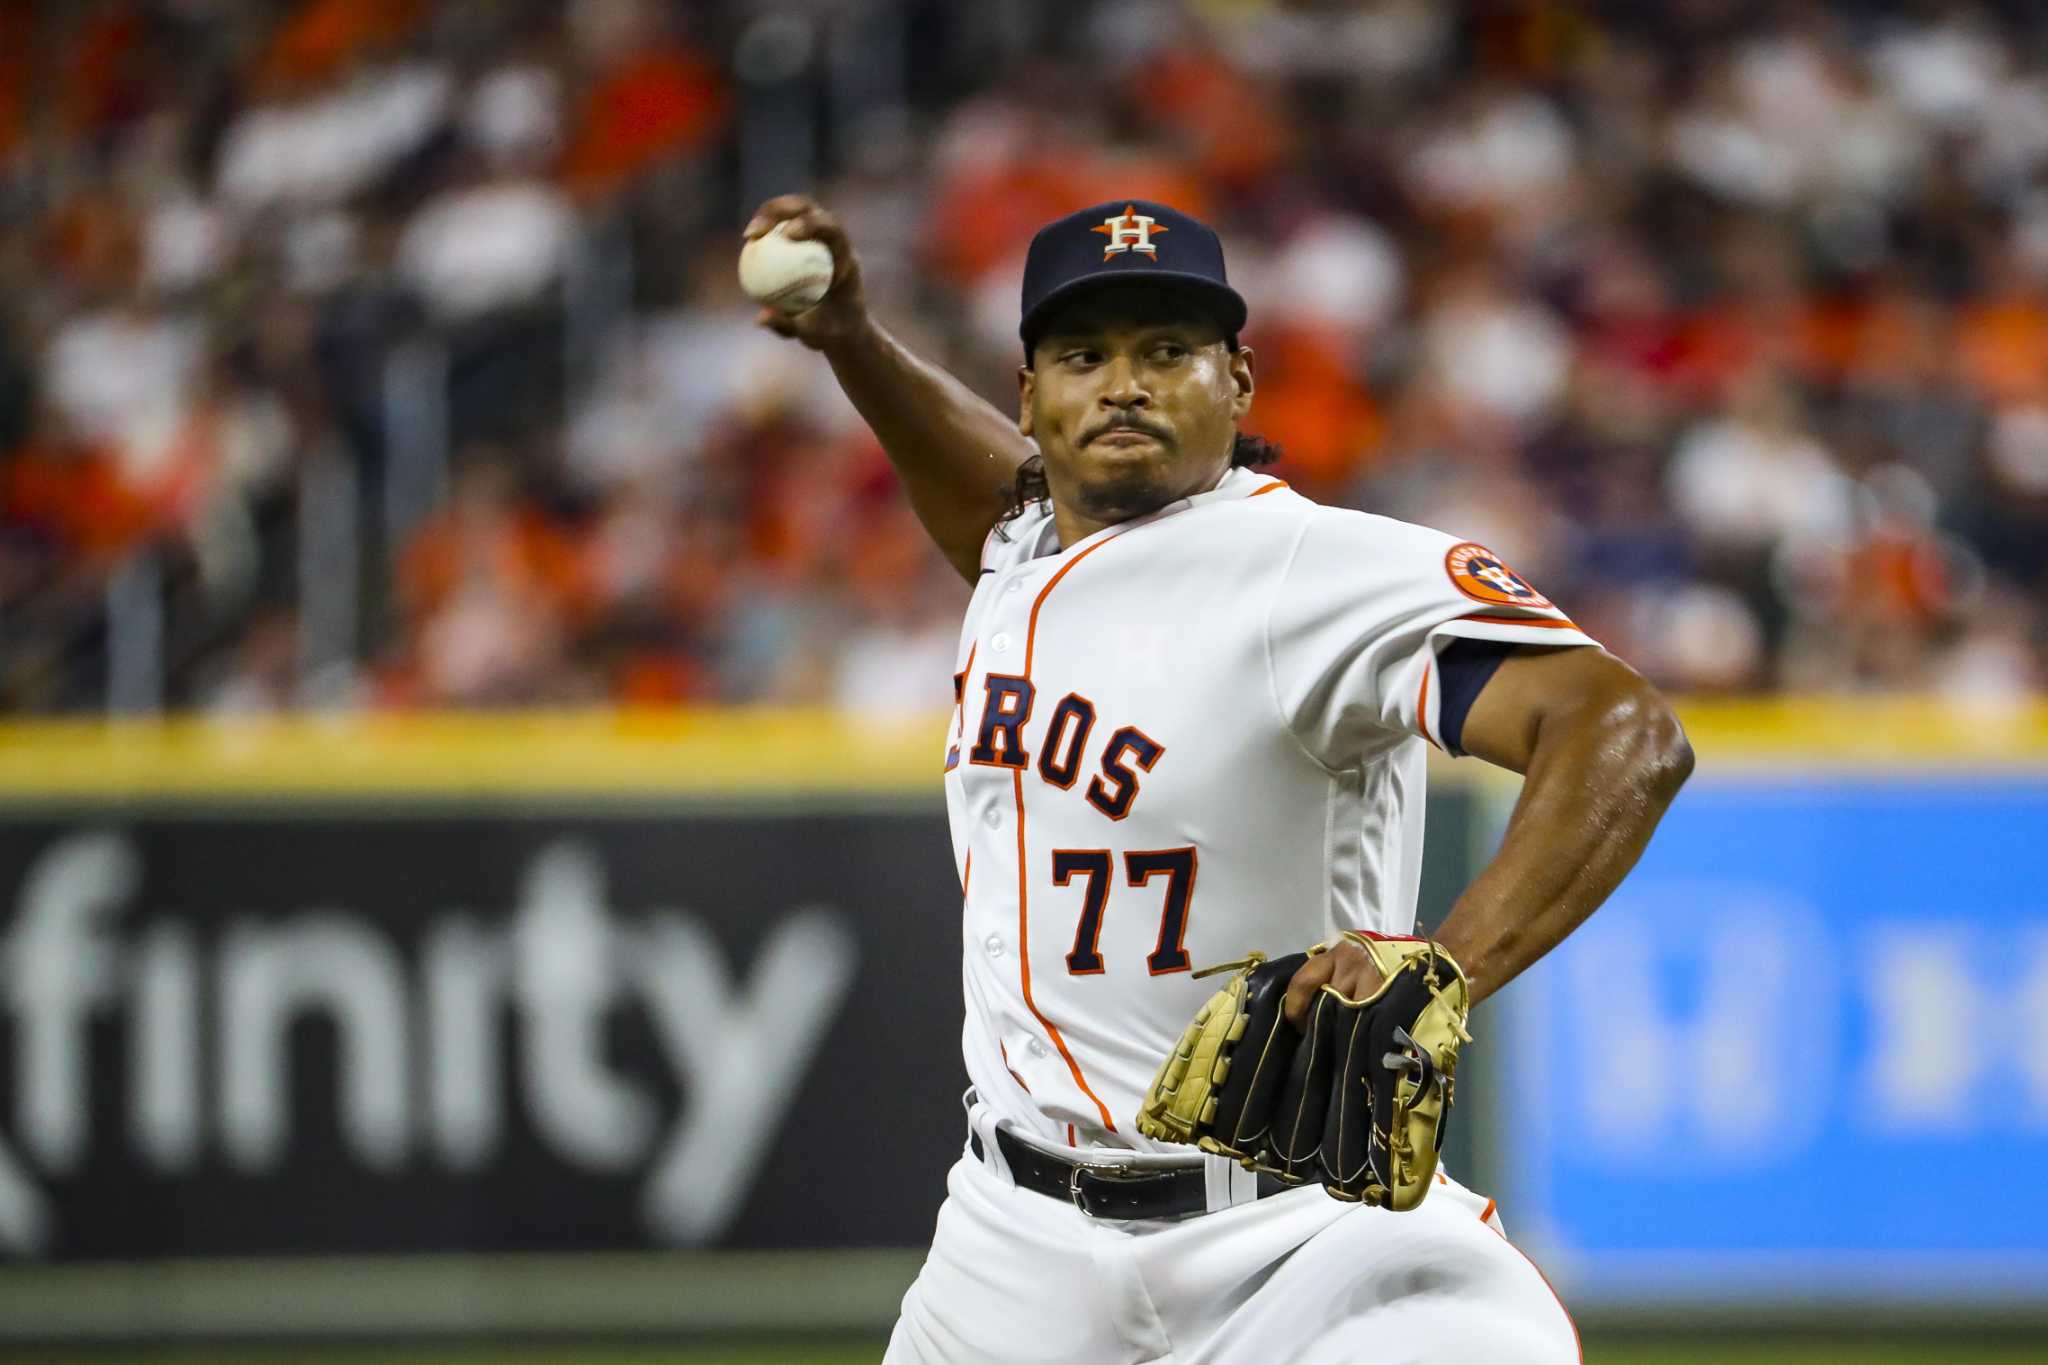 A rookie, Astros pitcher Luis Garcia excited about World Series stage